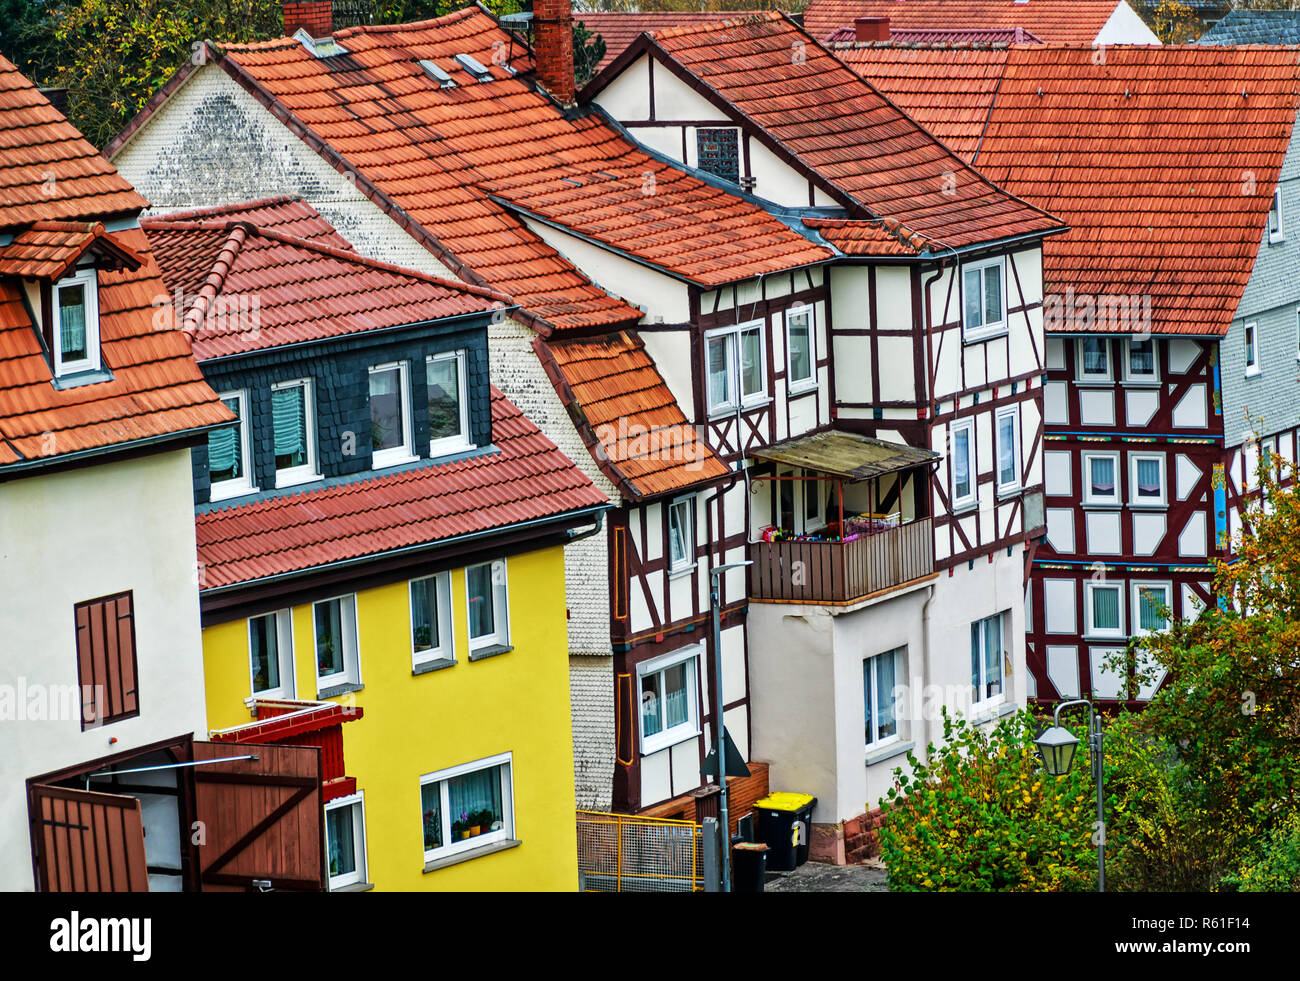 a row of historic houses in the old town of schlitz vogelsberg,also called the romantic castle town schlitz Stock Photo